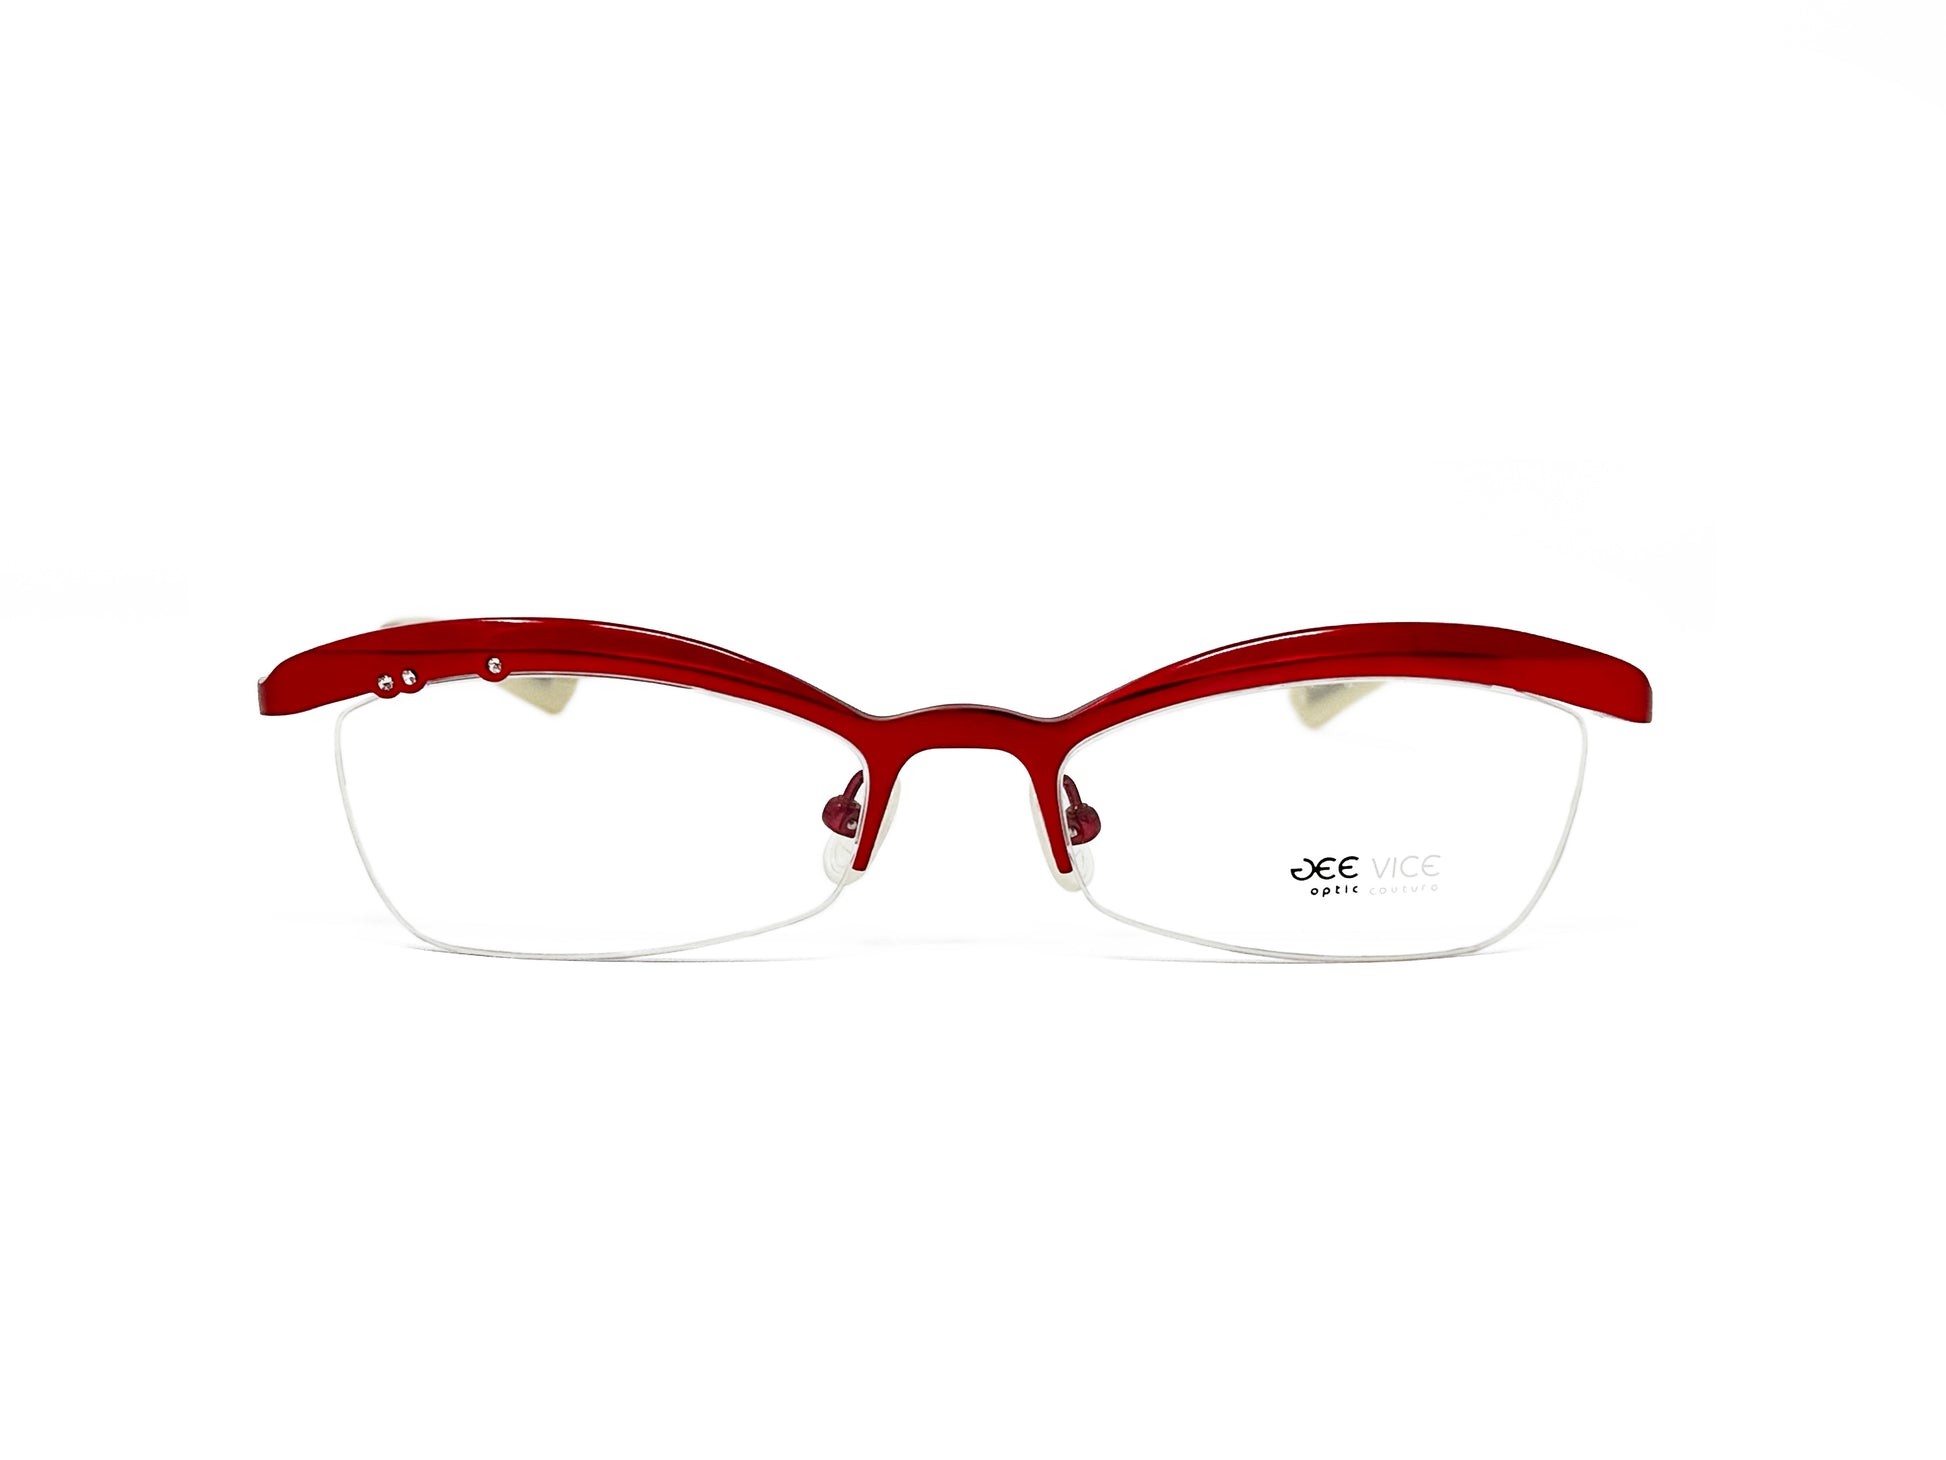 Gee Vice half-rim, rectangular with slight cat-eye, metal optical frame. Model: Angel Kiss. Color: Red. Front view. 